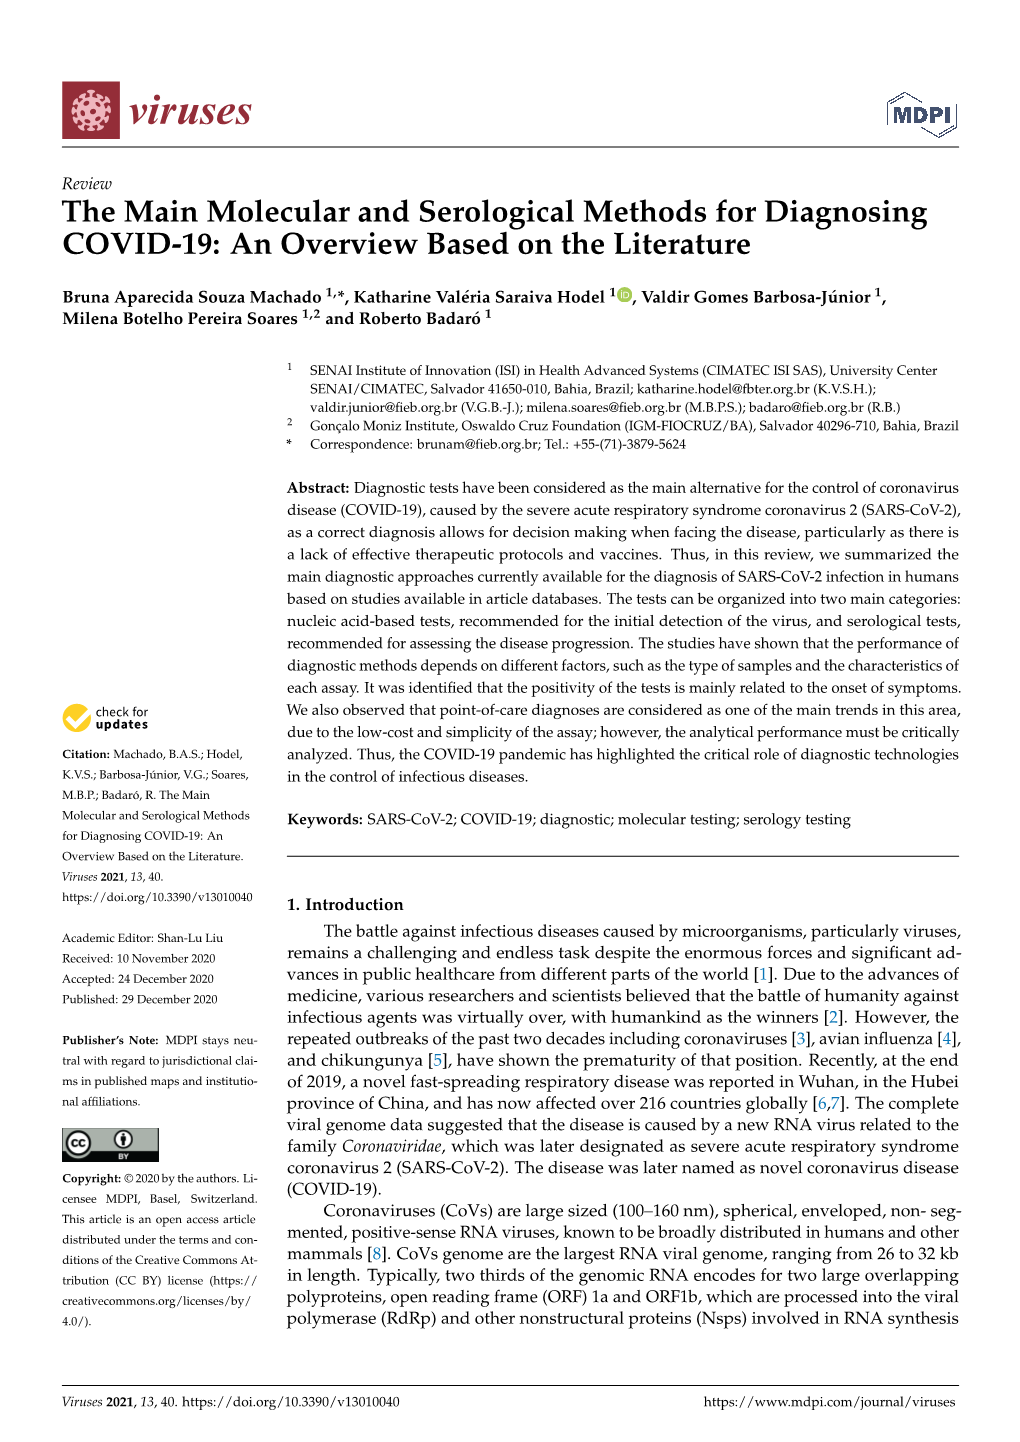 The Main Molecular and Serological Methods for Diagnosing COVID-19: an Overview Based on the Literature